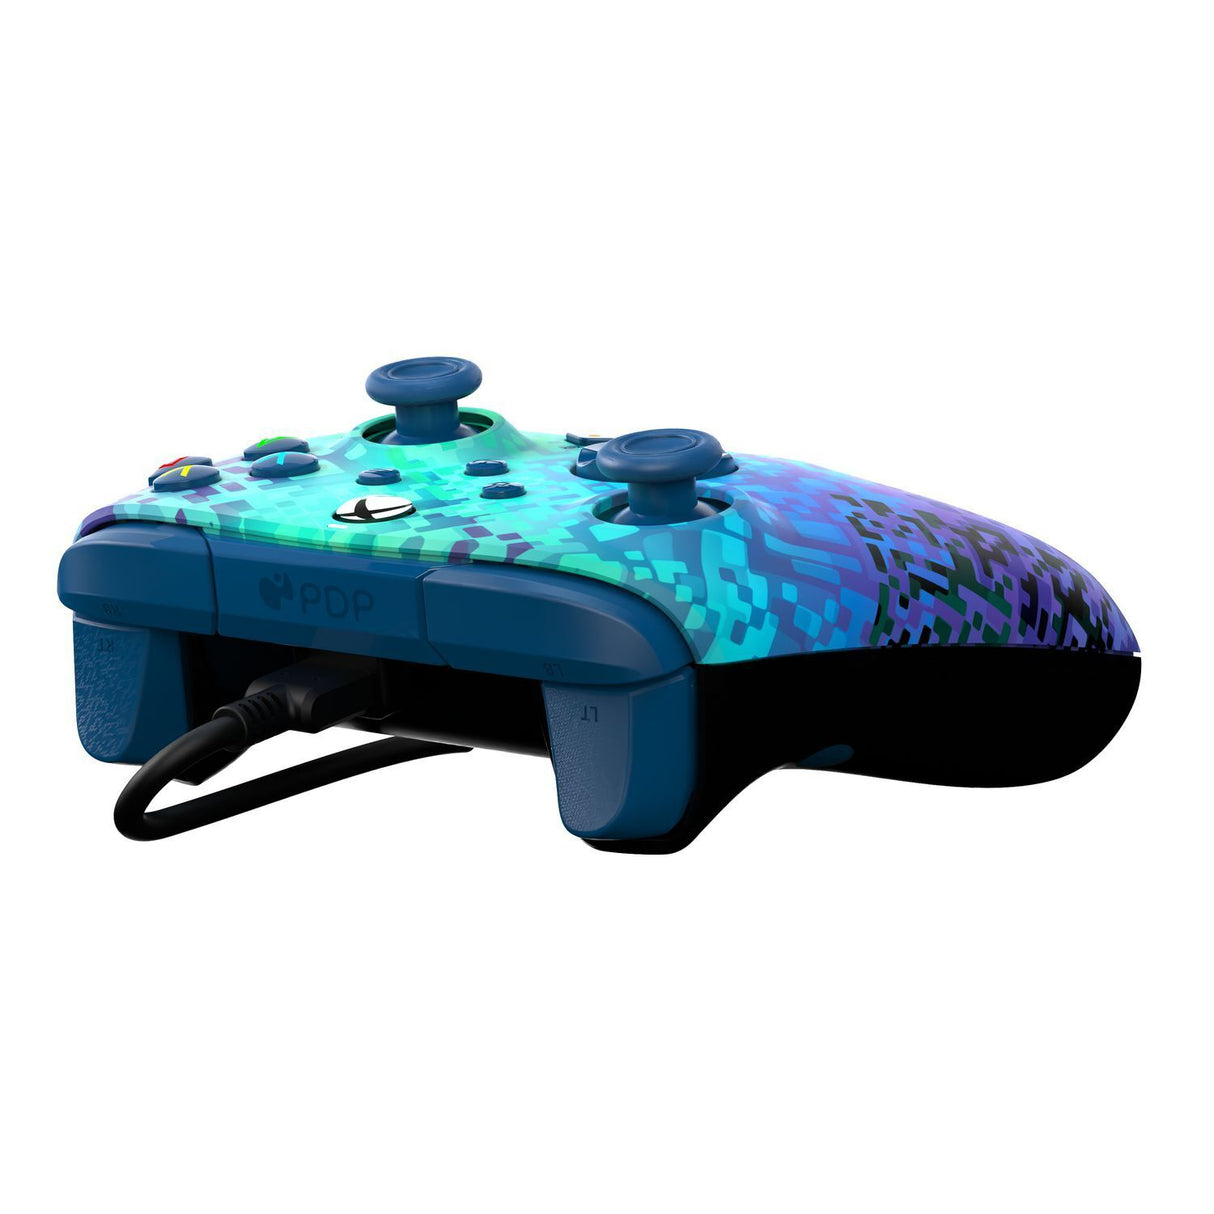 PDP Rematch Wired Controller for Xbox - Glitched Green - Pristine